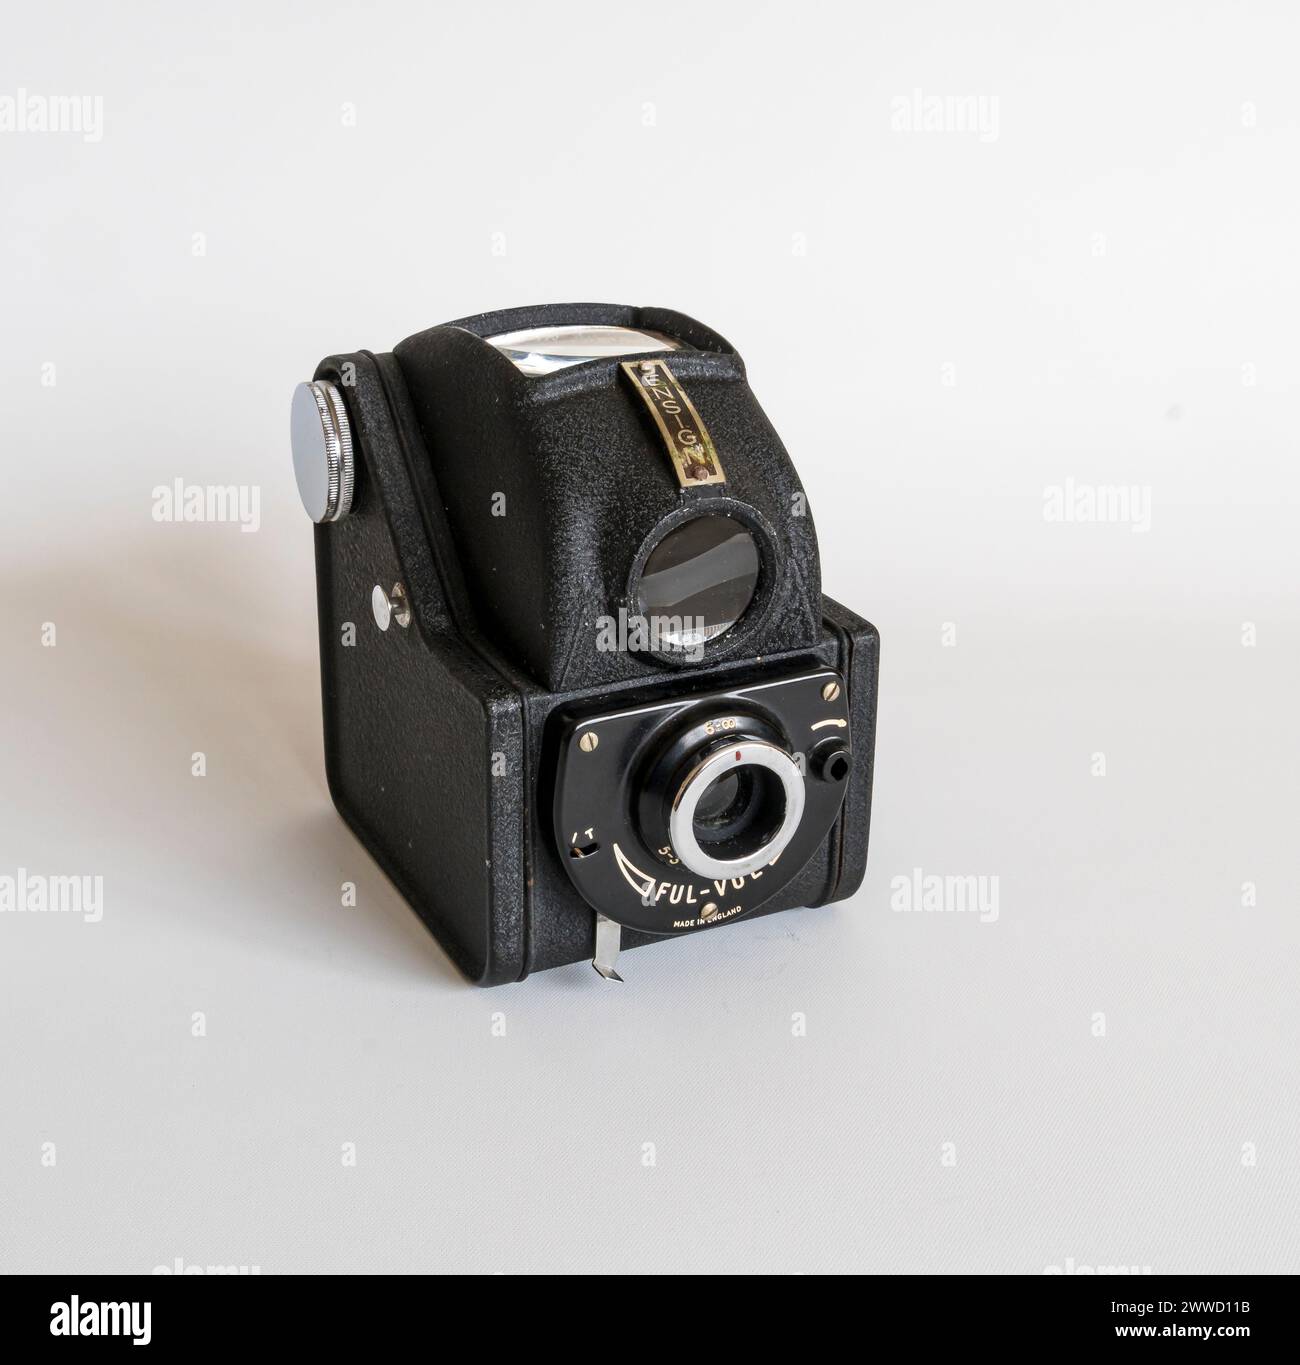 Ensign Ful-vue roll film camera Stock Photo